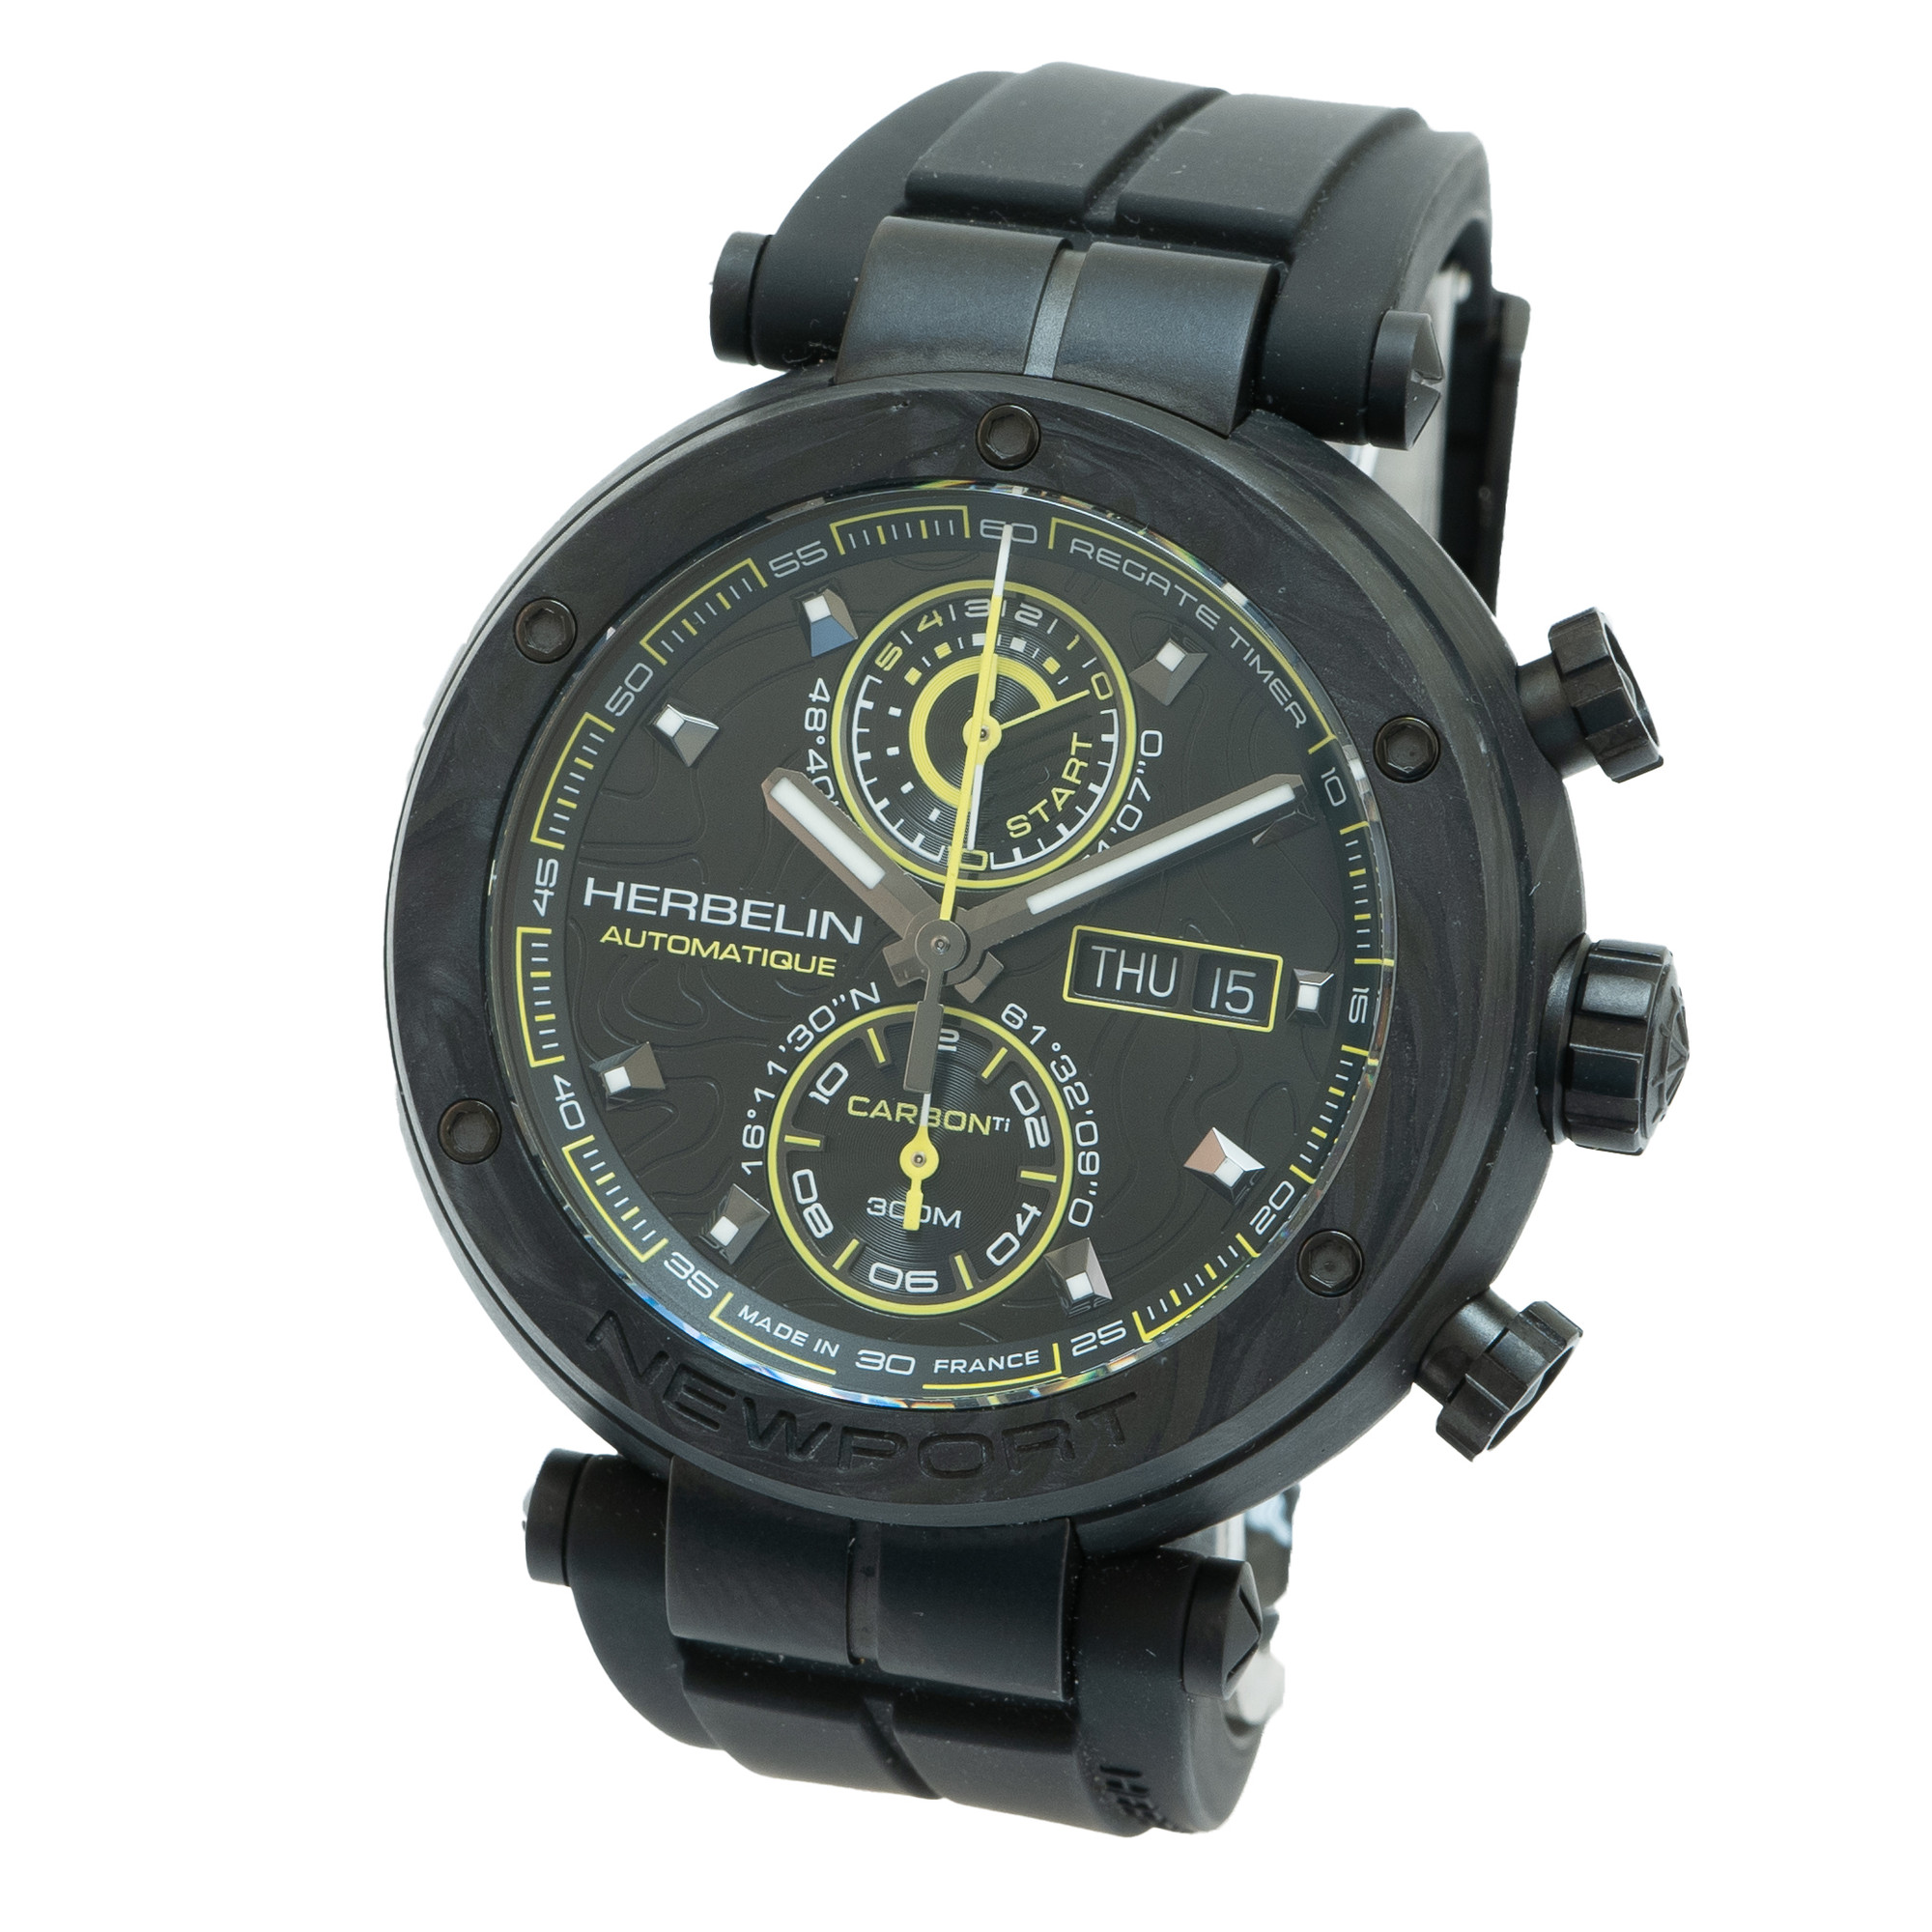 Herbelin Newport Carbon 288 Chronograph *Limited Edition* - Inventory 5642